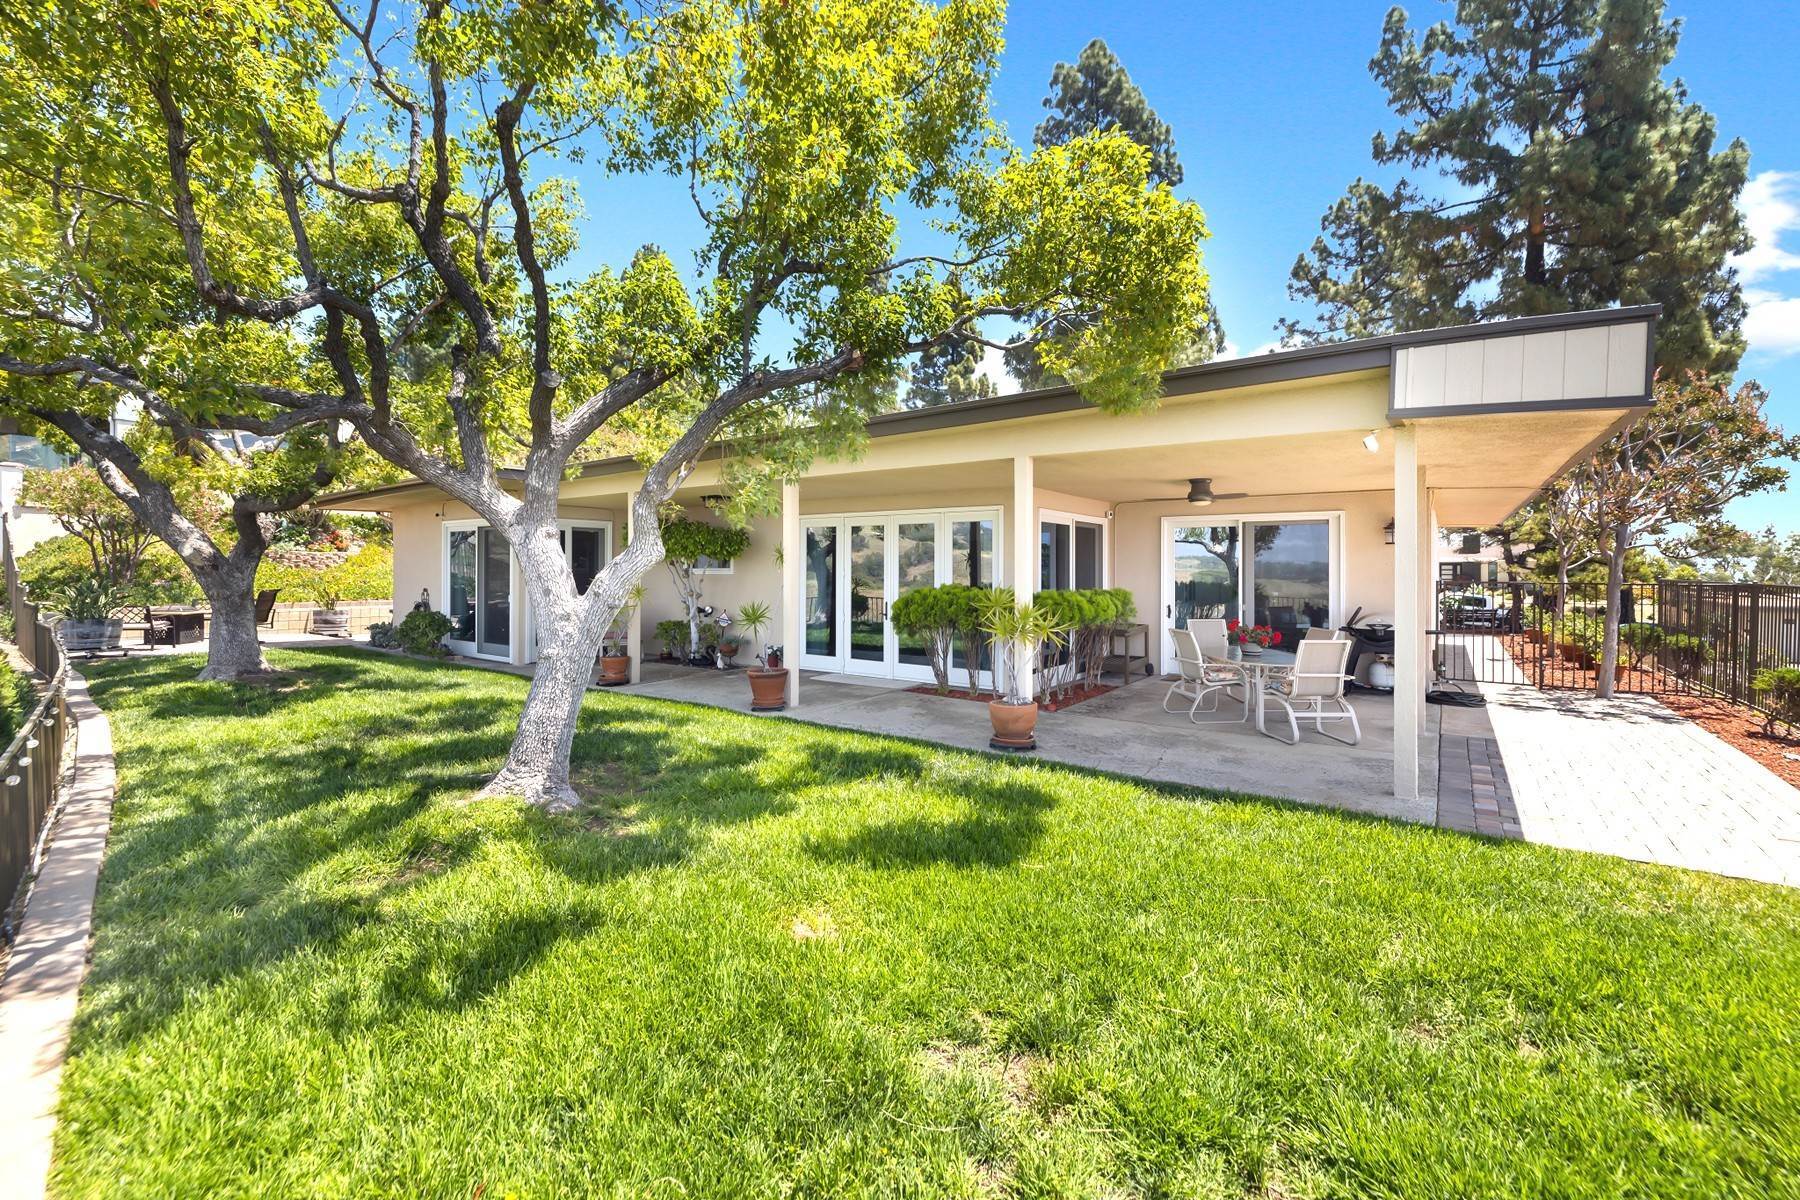 27. Single Family Homes for Sale at 2573 N. Mountain Avenue, Claremont, CA 91711 2573 N. Mountain Avenue Claremont, California 91711 United States